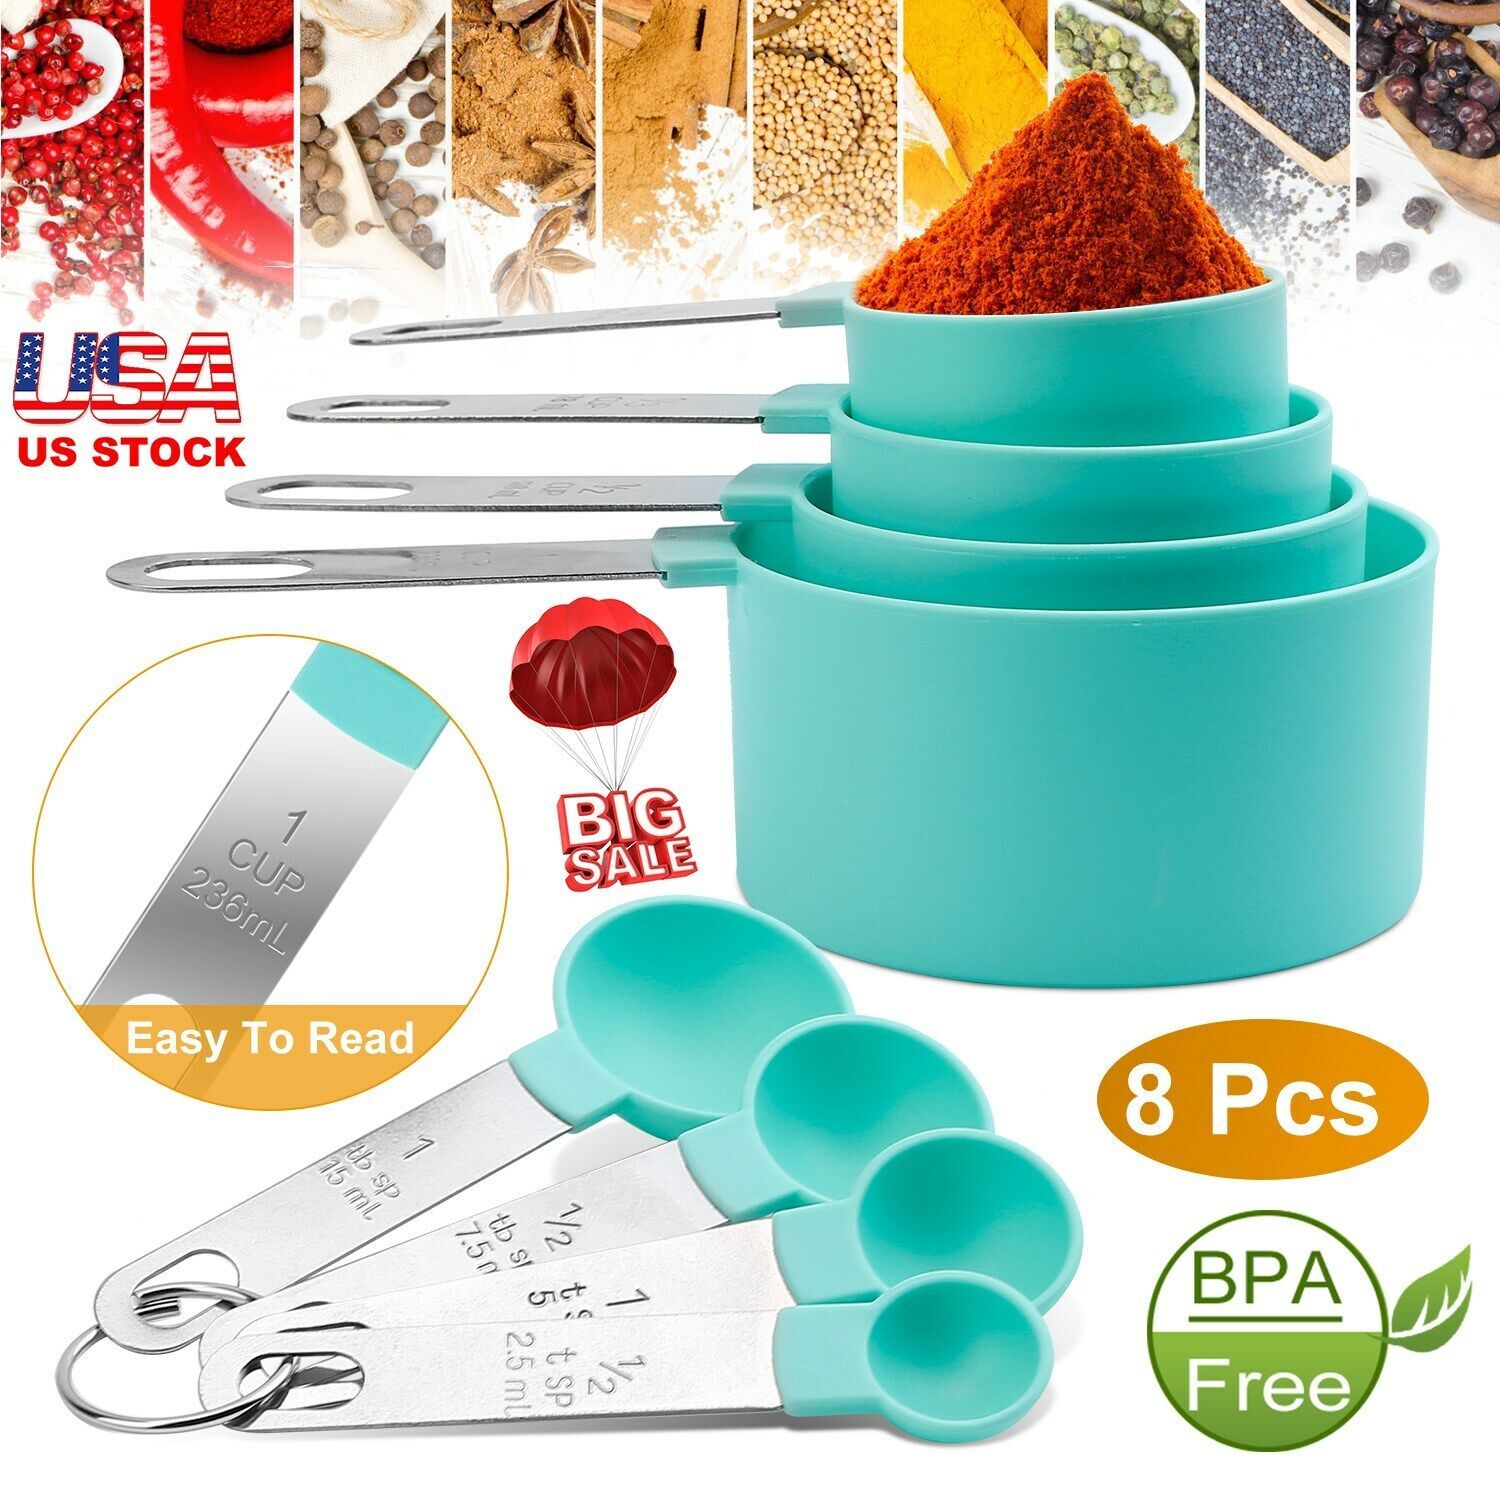 GoodCook 8pc Measuring Cup and Spoon Set